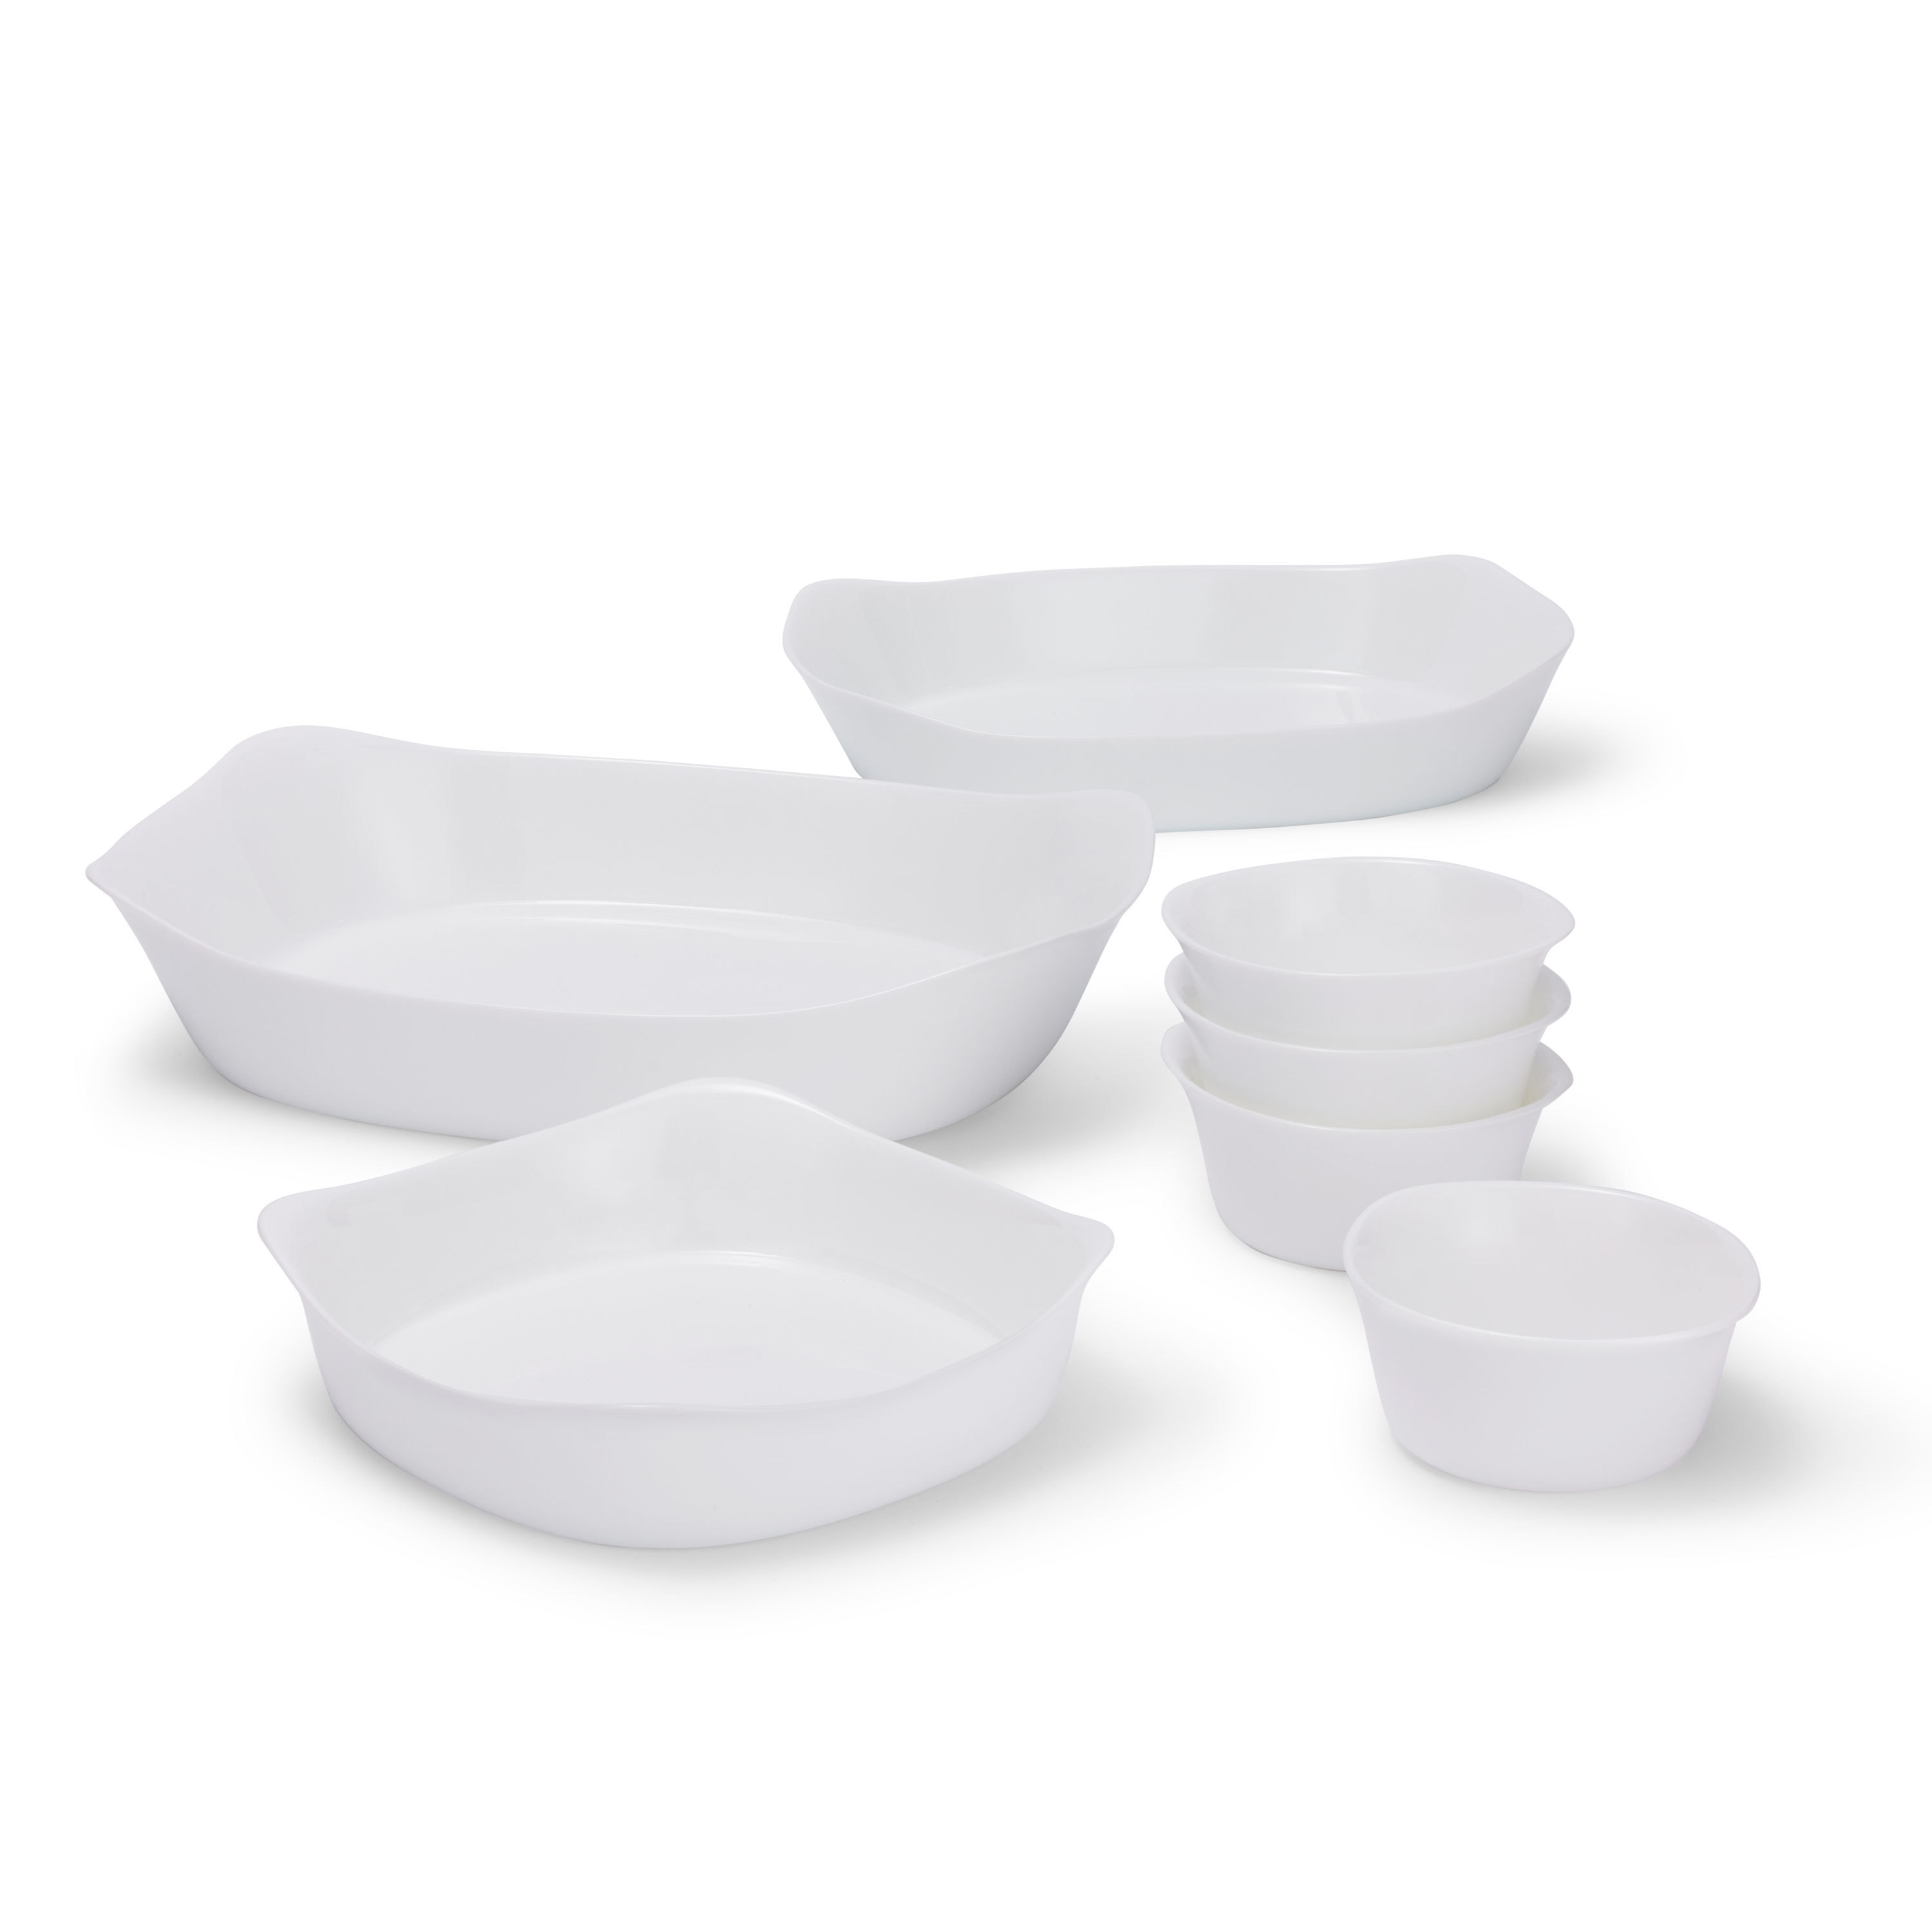 Rubbermaid Glass Baking Set for Oven, DuraLite 7 Piece Set without Lids - image 1 of 13